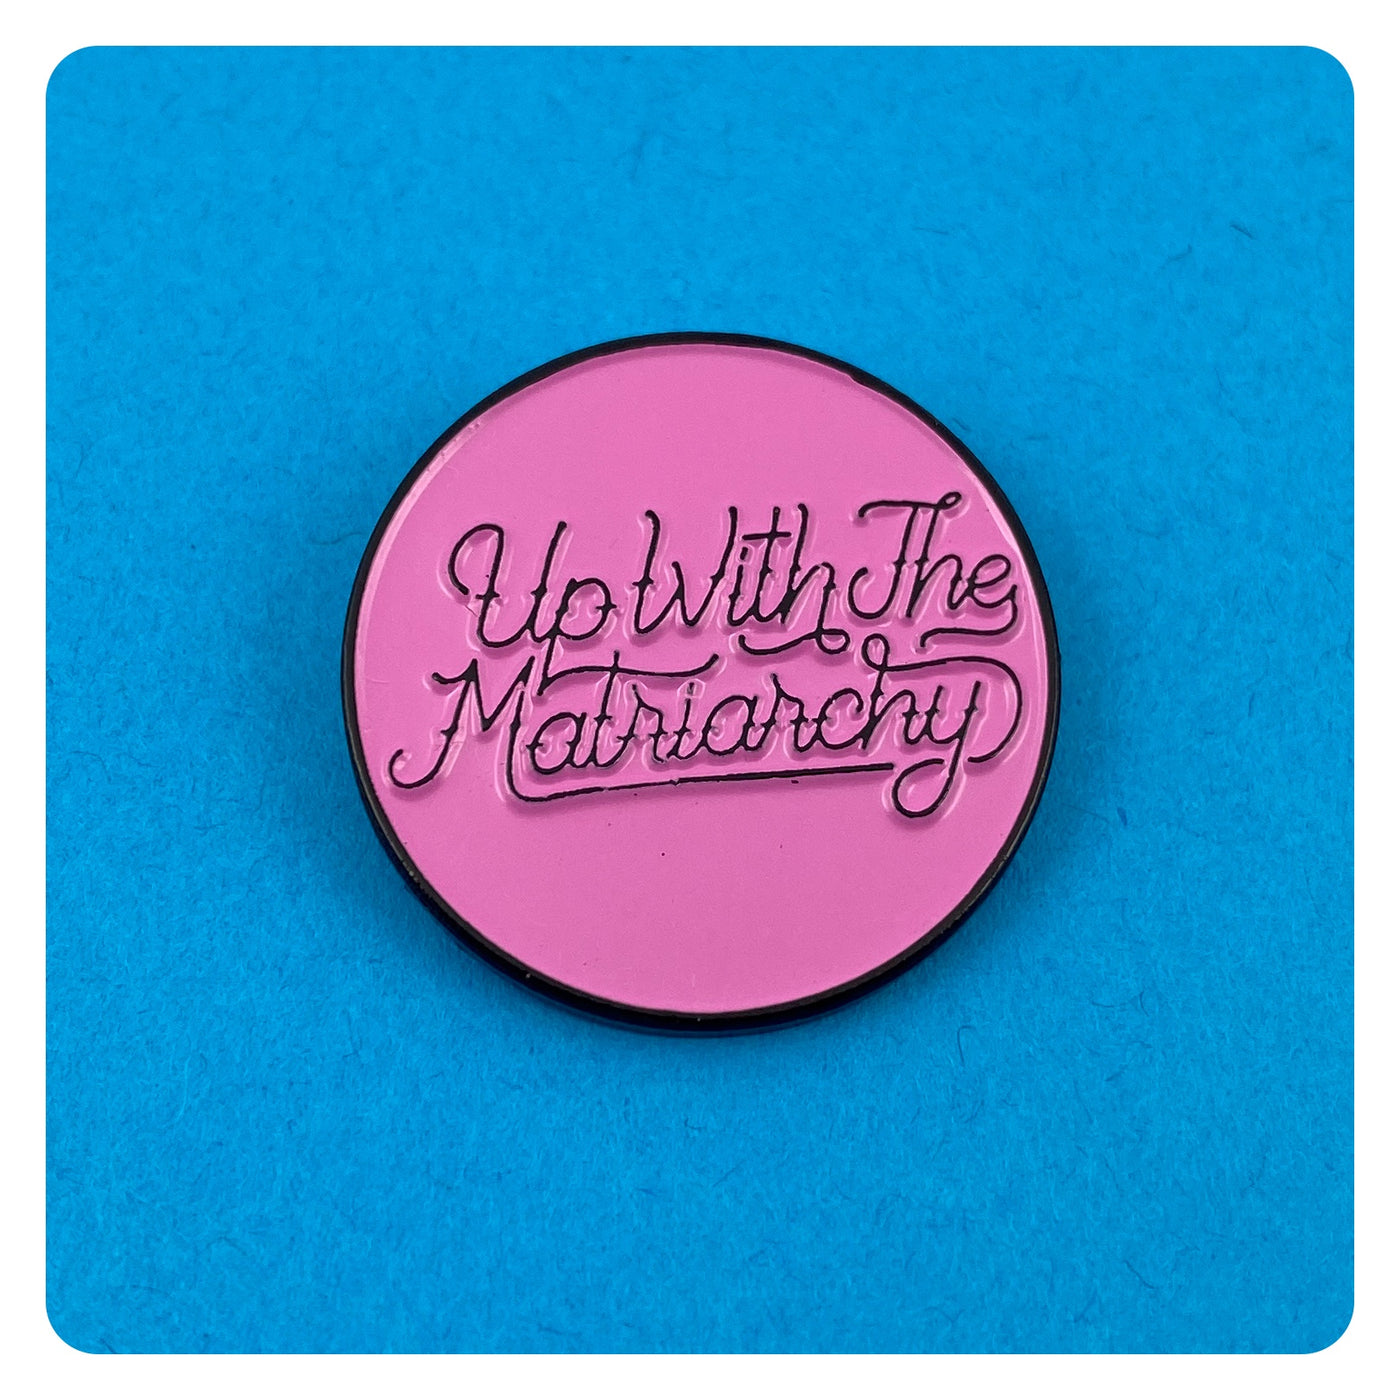 Up With The Matriarchy Enamel Pin